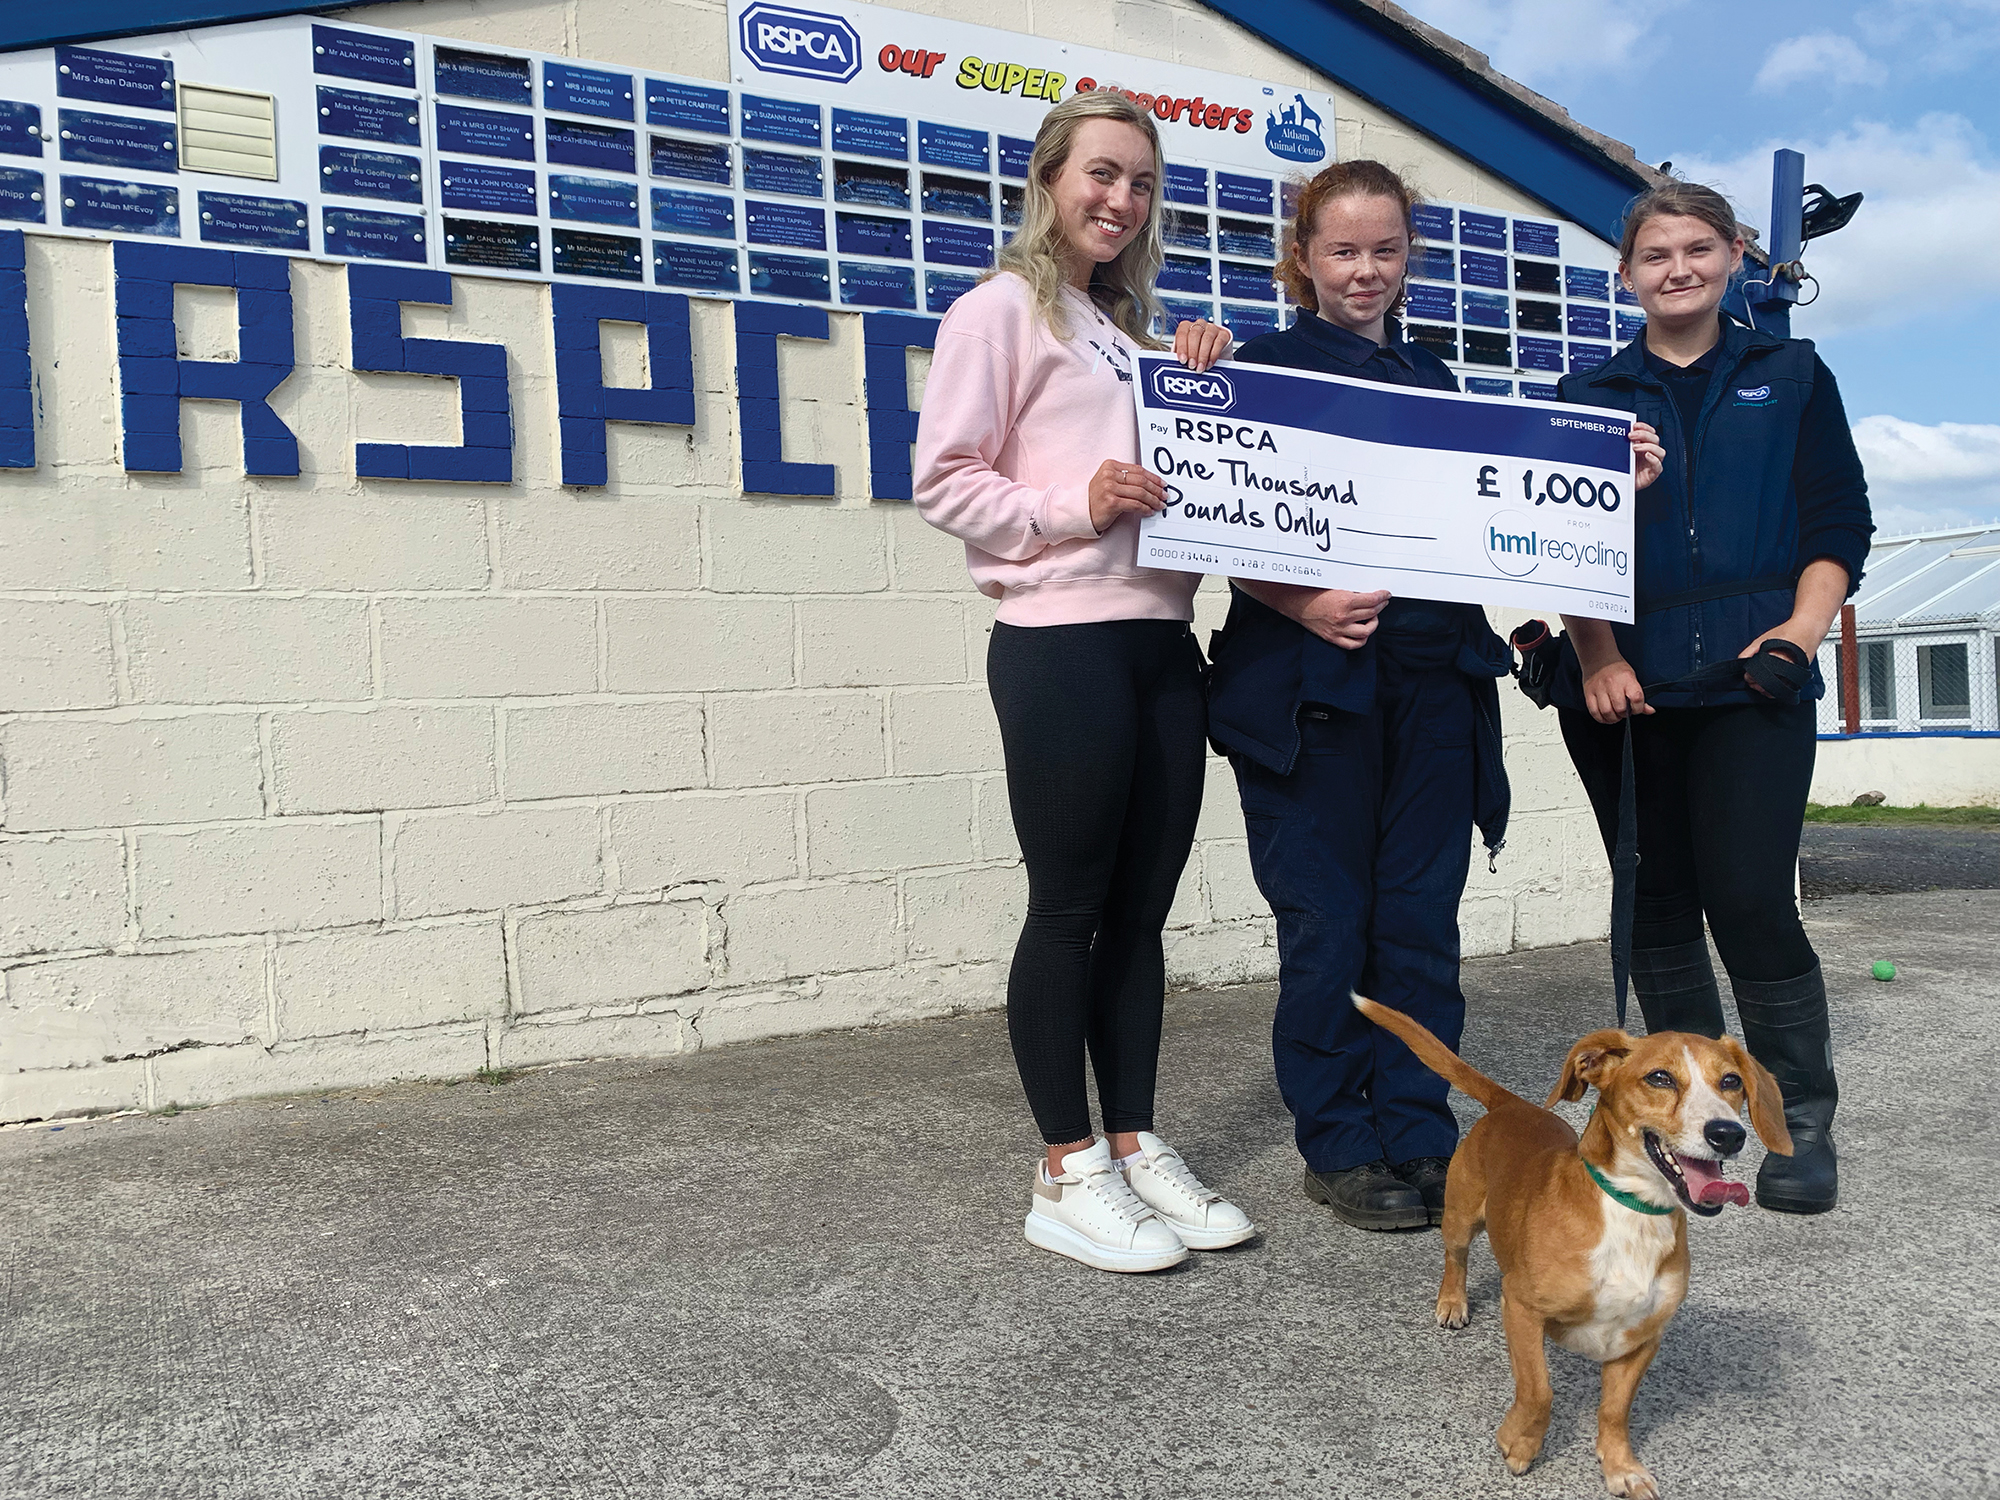 HML Recycling donates £1,000 to struggling Lancashire East Branch of the  RSPCA - HML Recycling